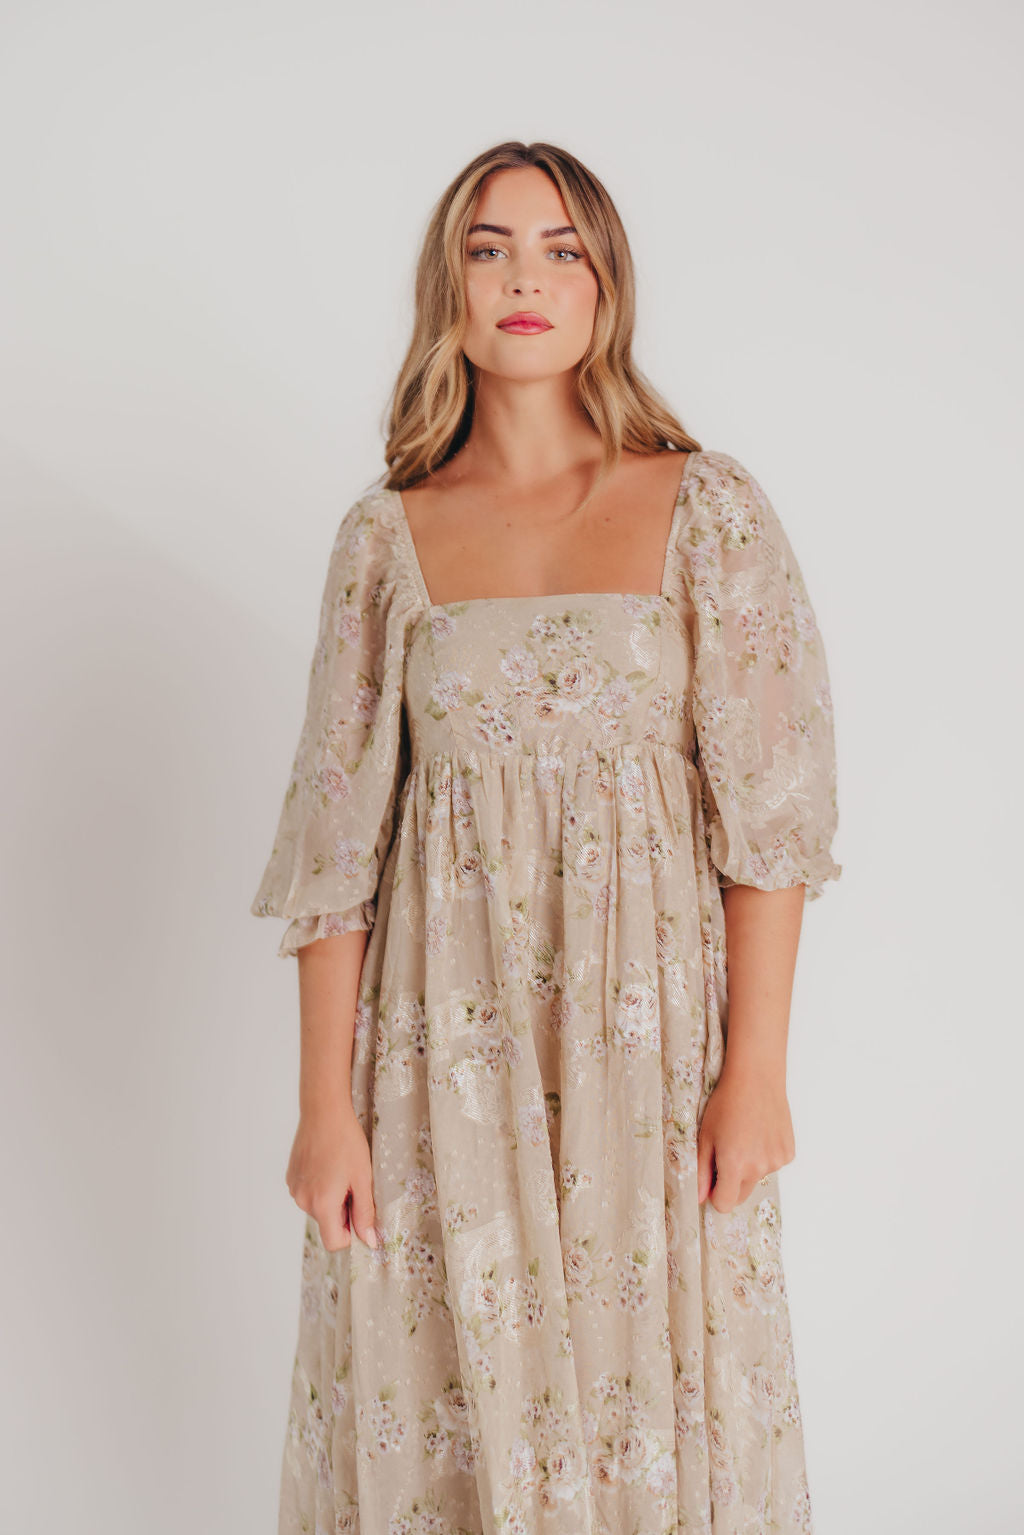 Mona Maxi Dress in Beige/Brown Floral - Bump Friendly - Inclusive Sizing (S-2X) *LOW QUANTITIES